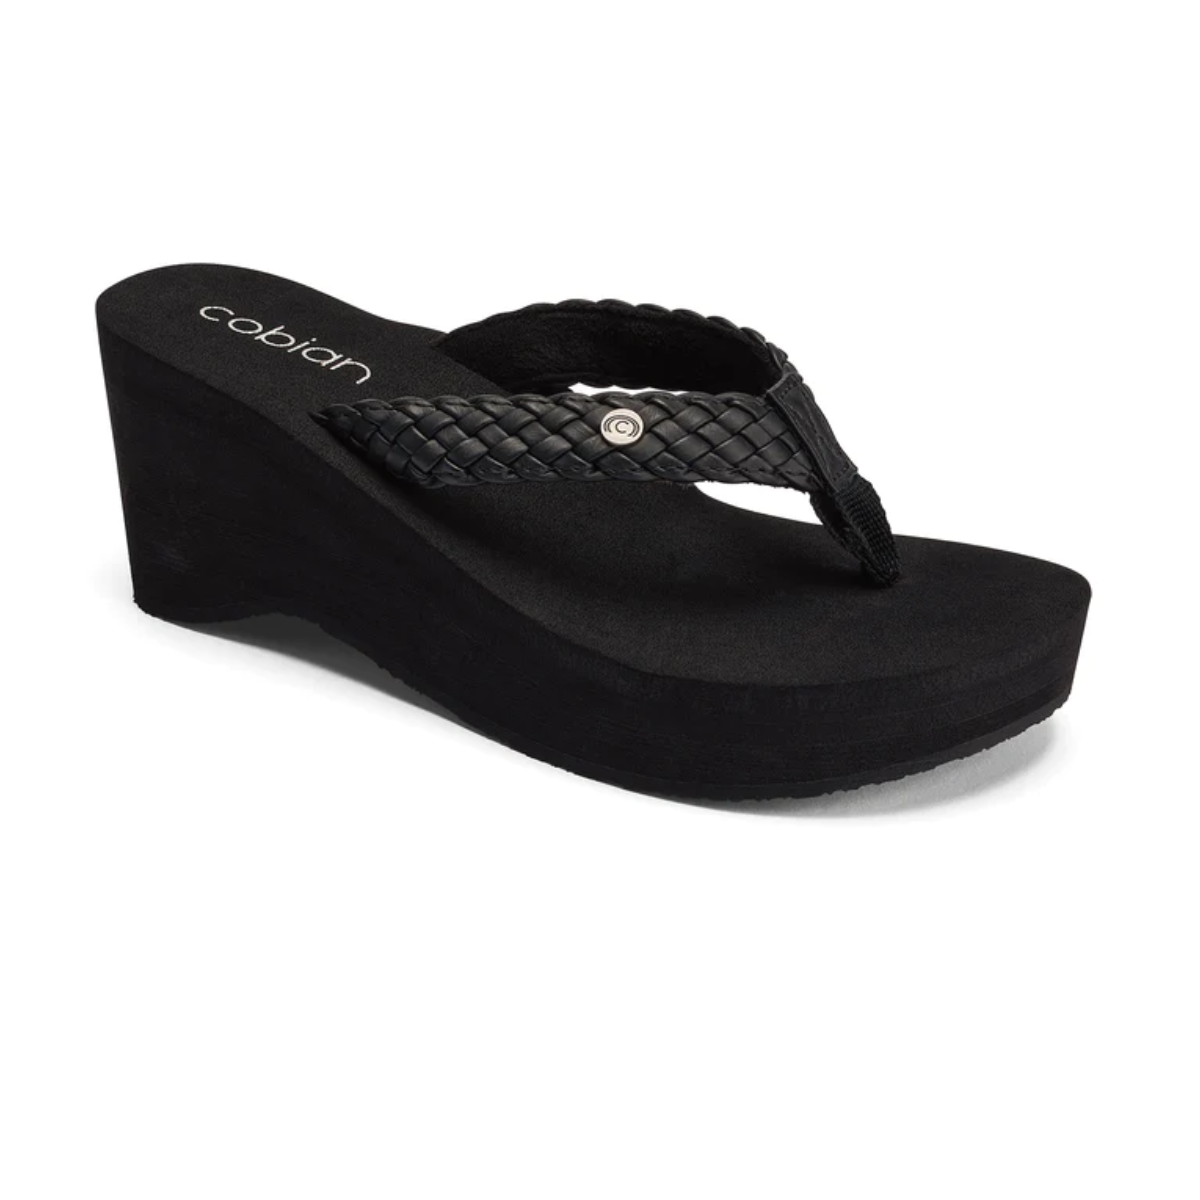 A women's ZOE By Cobian black wedge flip flop with braided straps, designed to provide arch support and featuring an EVA wedge.